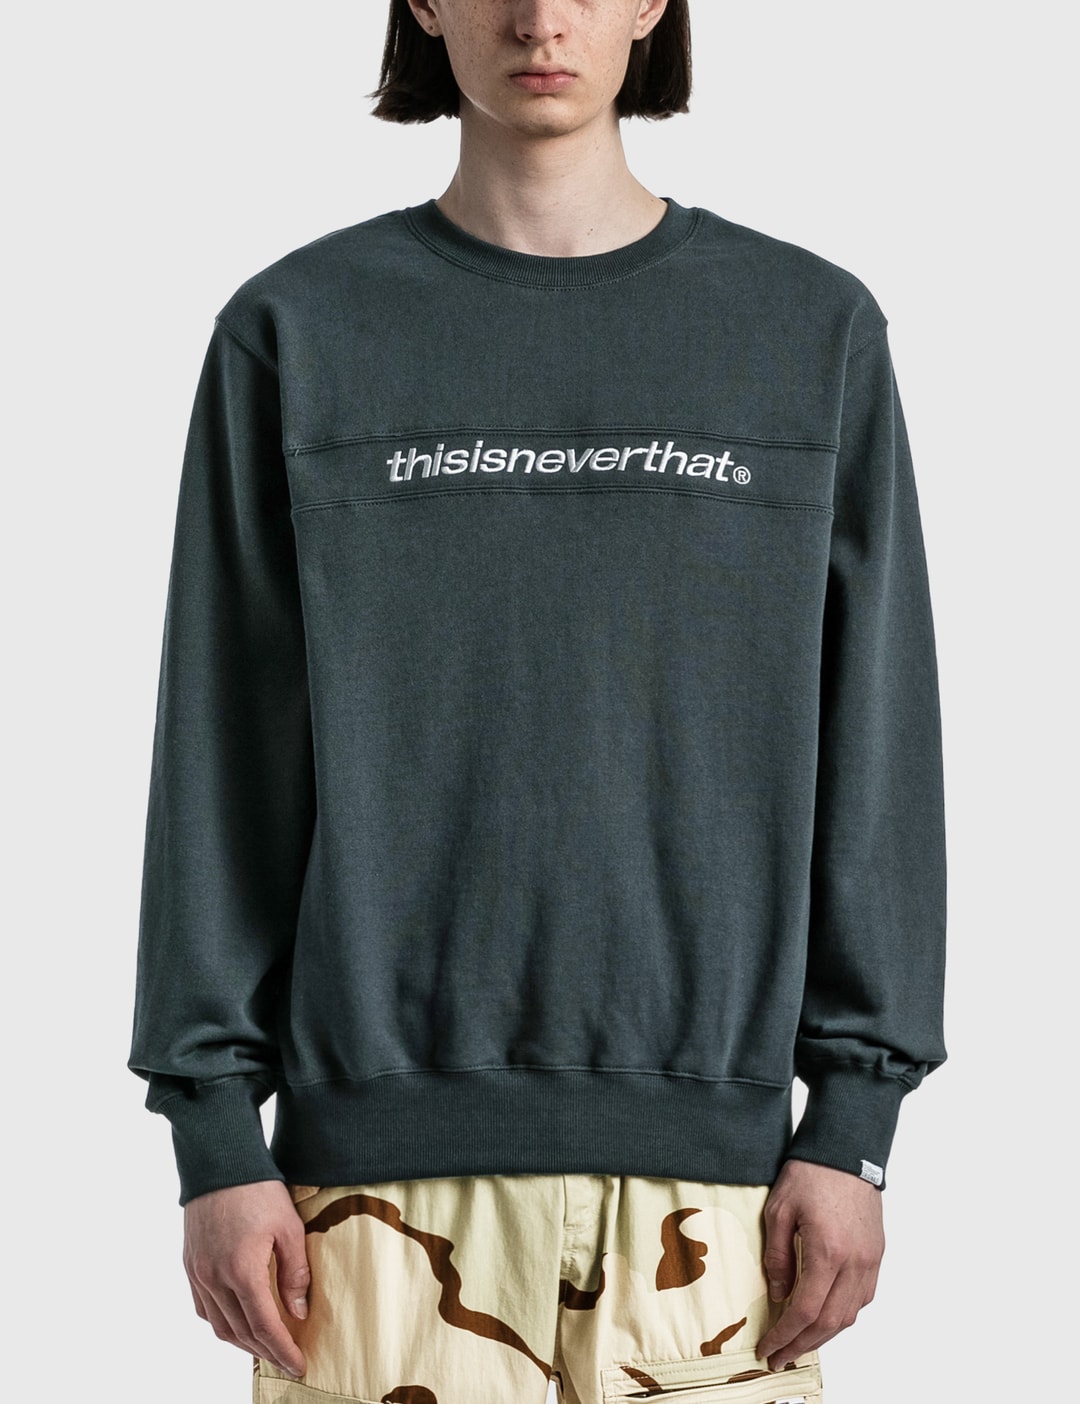 thisisneverthat® - Logo Sweatshirt | HBX - Globally Curated Fashion and ...